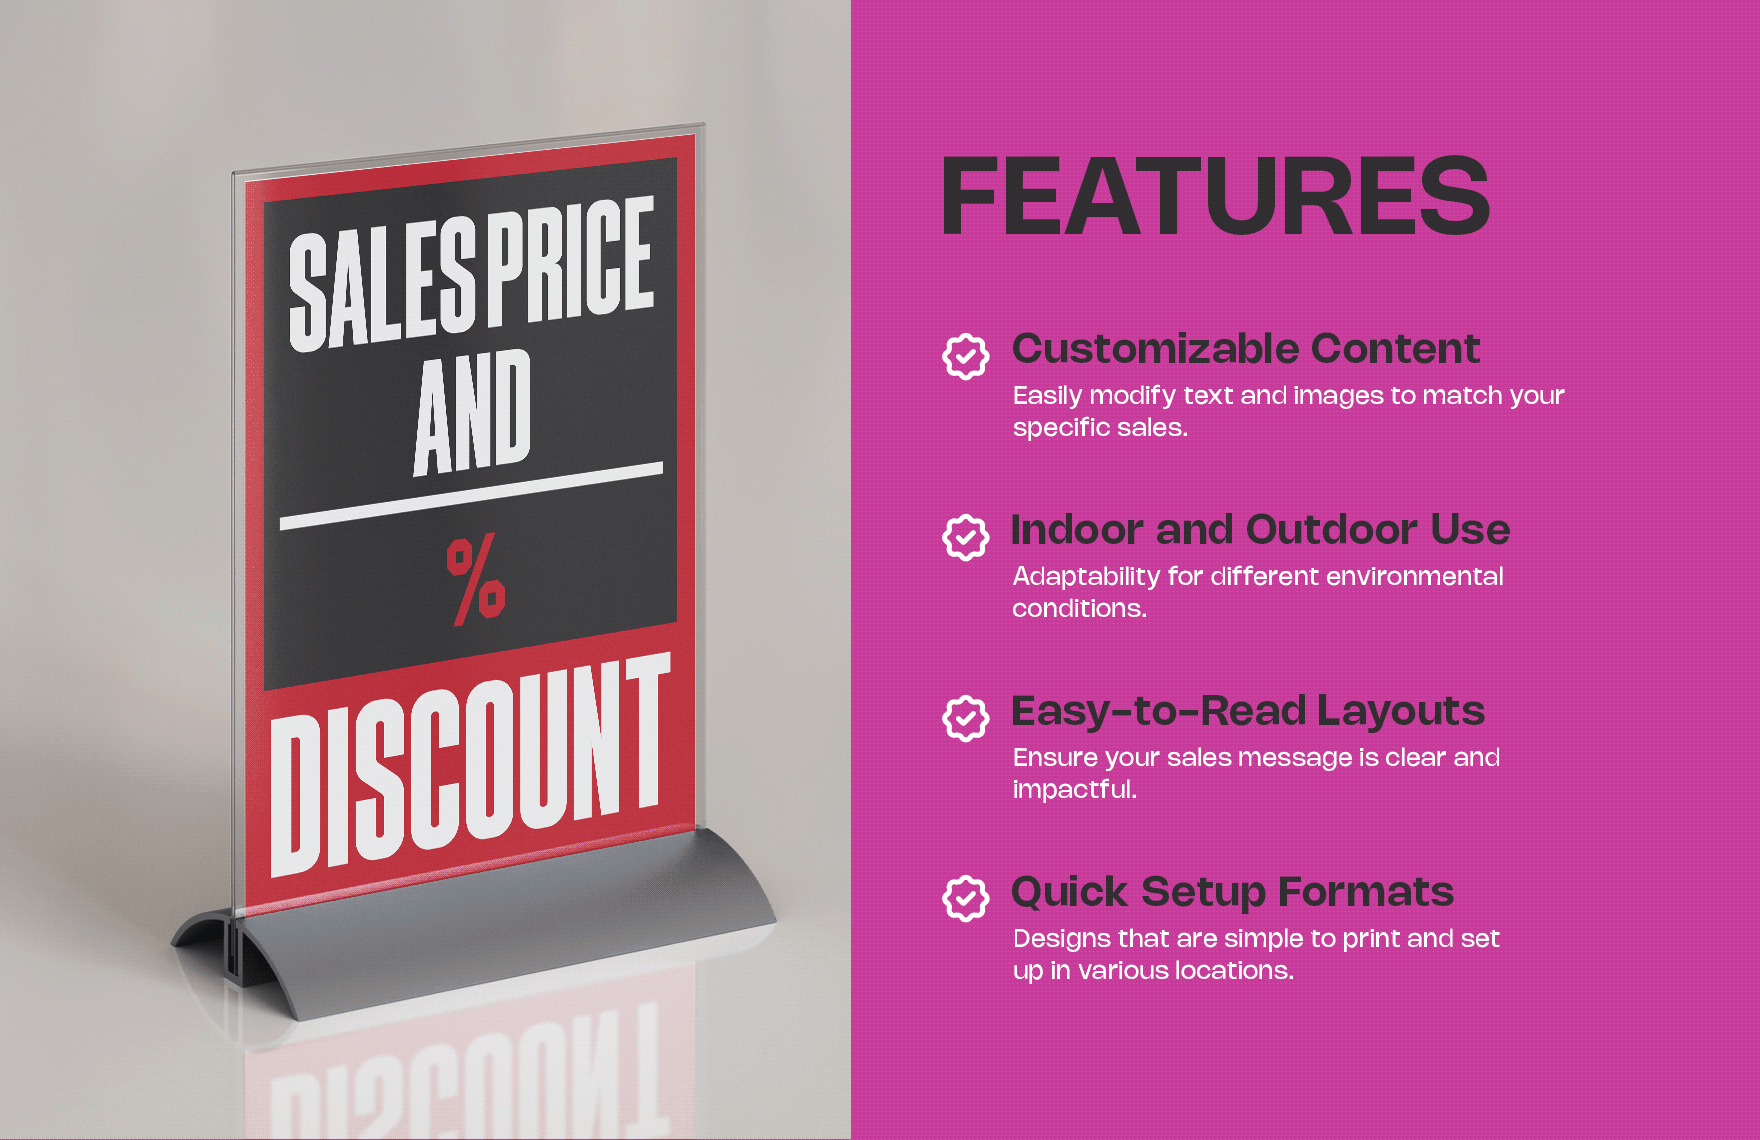 Sales Price and Discount Signage Template